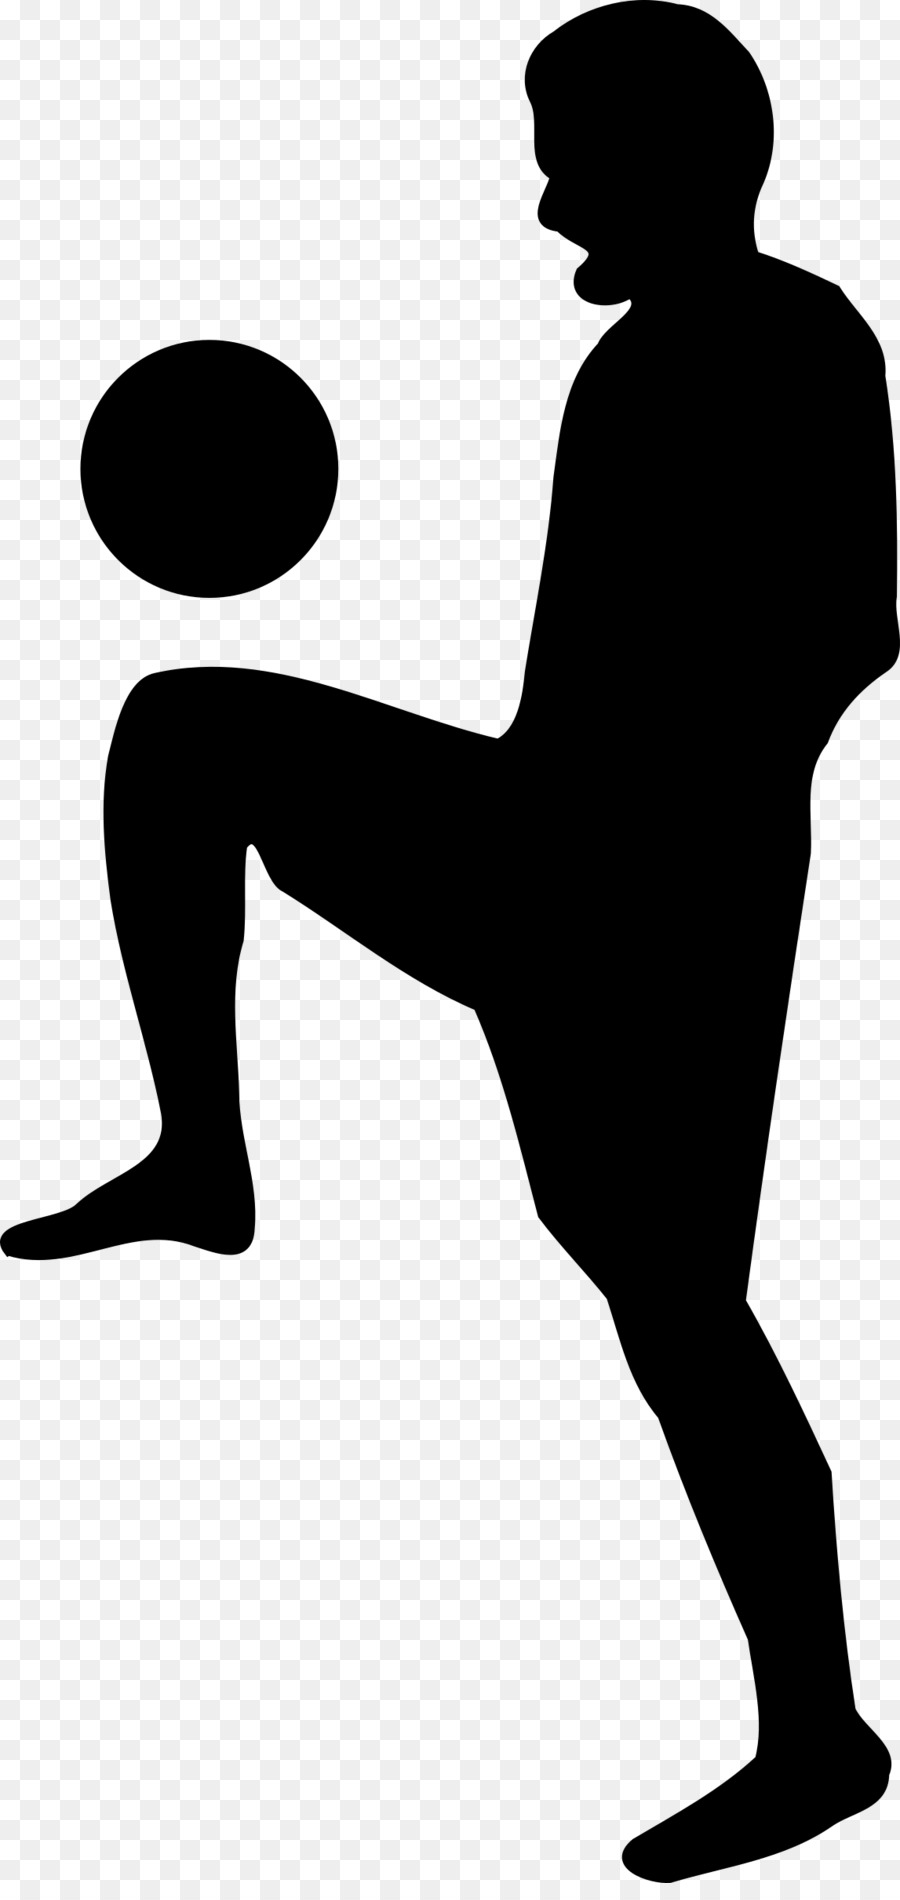 Football Clip art - playing soccer silhouette figures material png download - 1147*2400 - Free Transparent Football png Download.